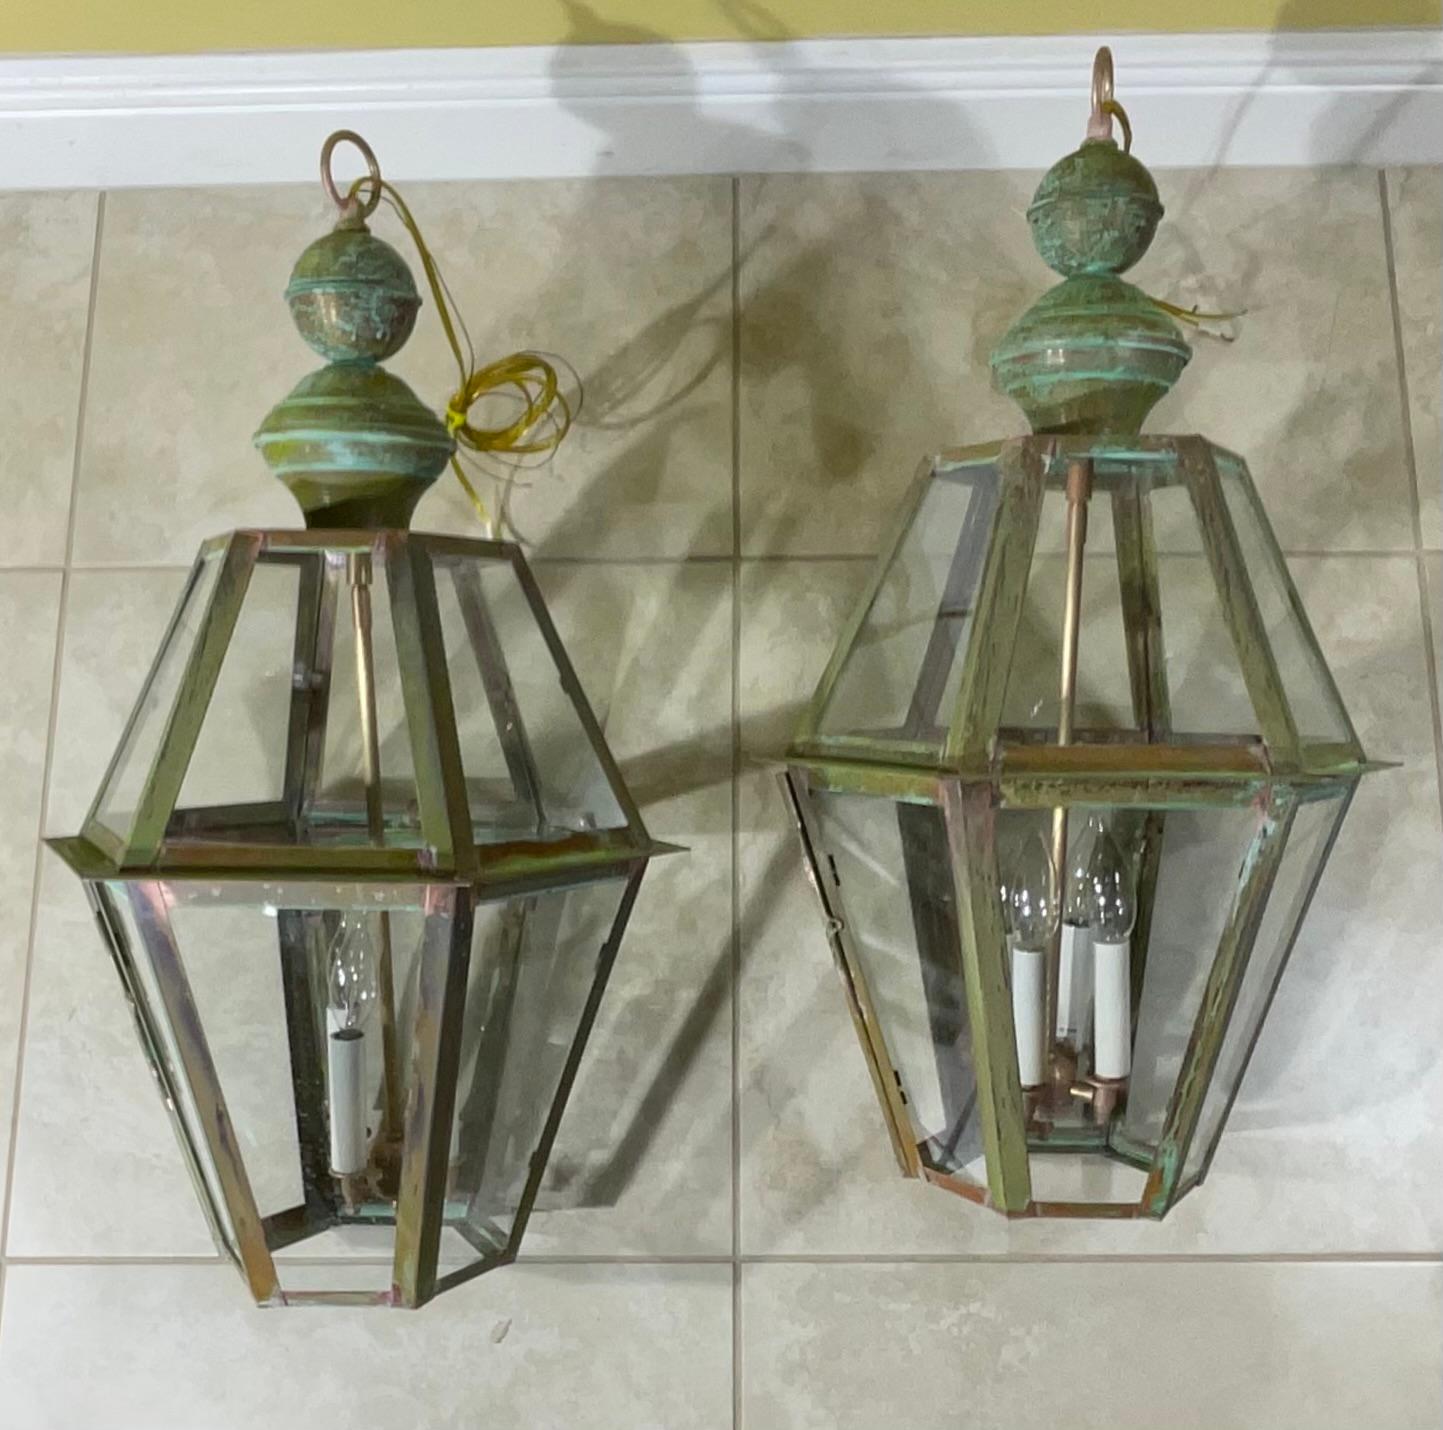 Pair Of Six Sides Solid Copper And Brass Handcrafted Hanging Lanterns For Sale 1